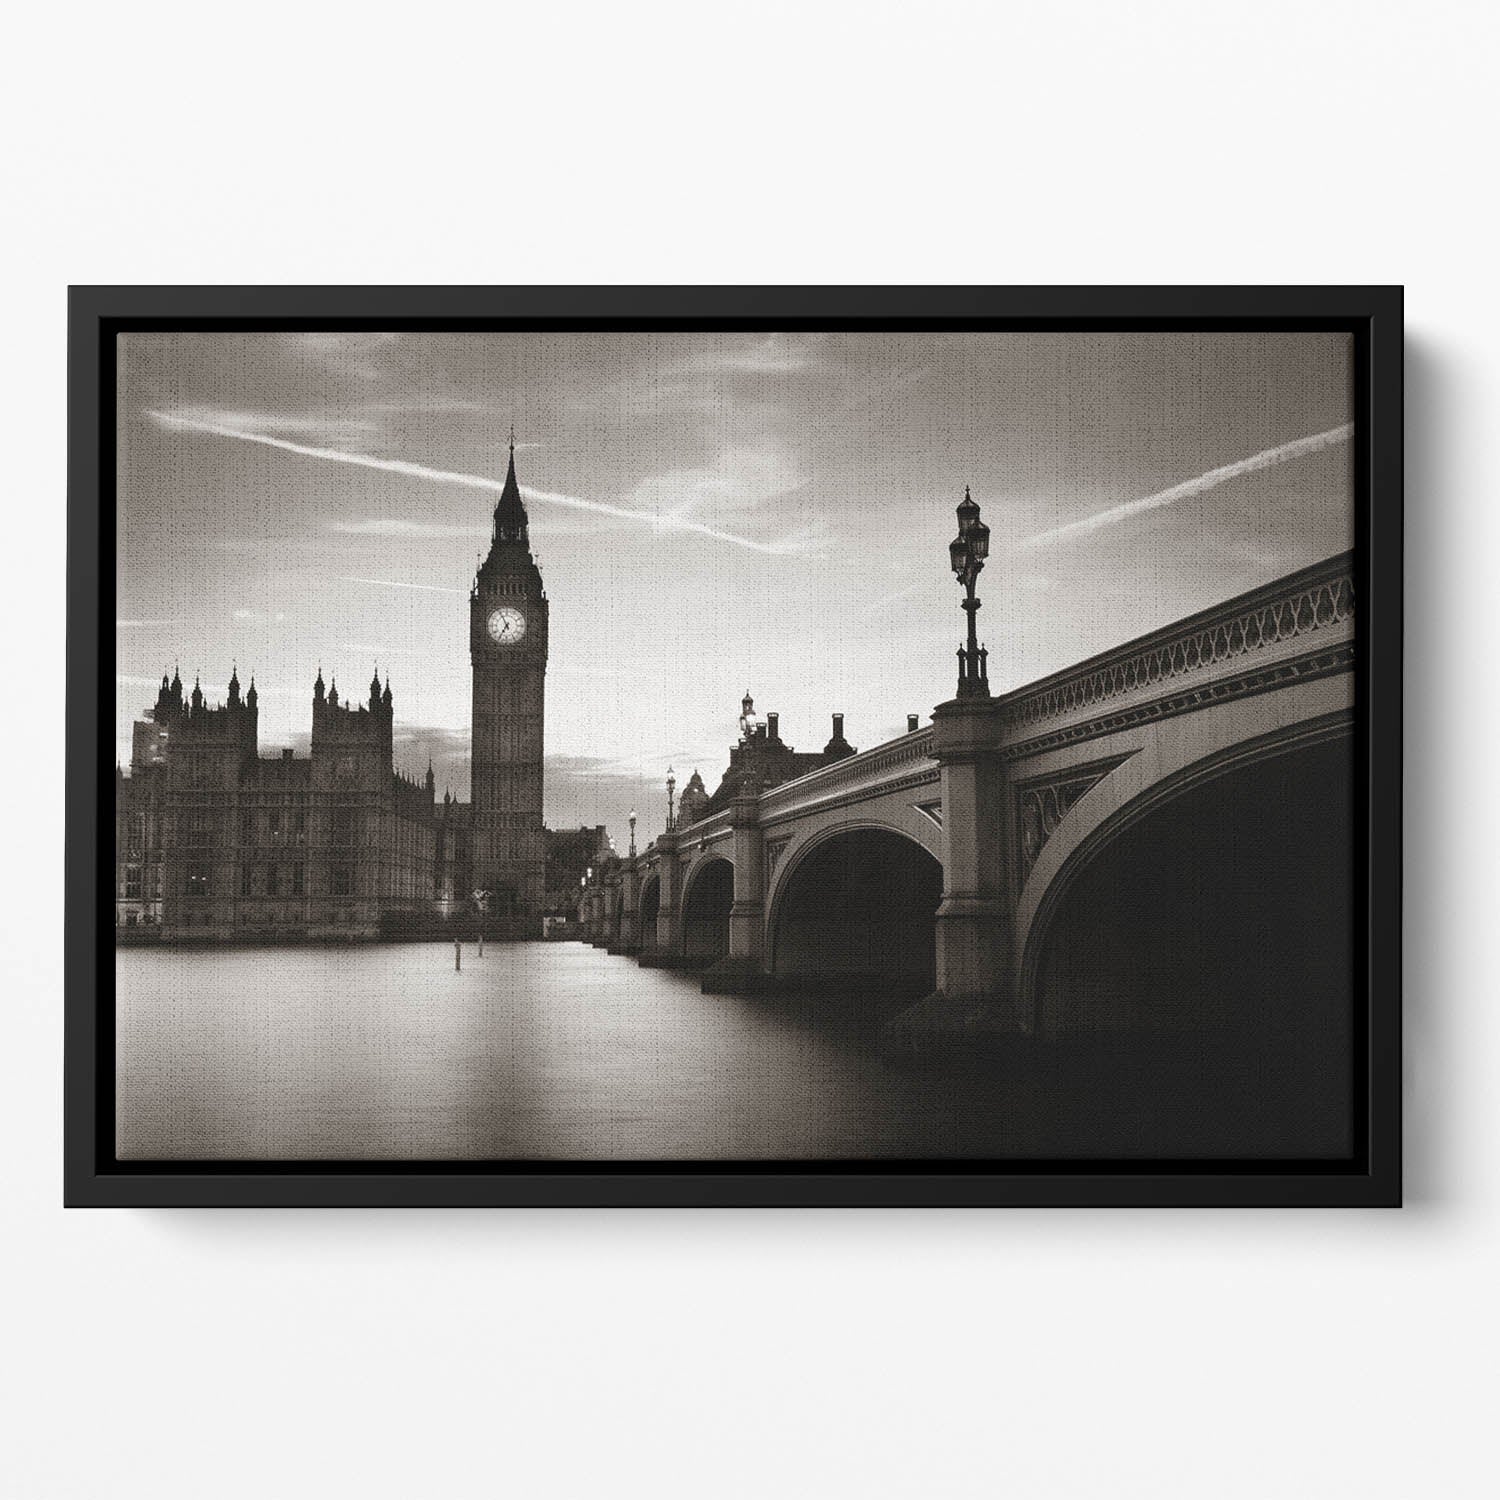 Big Ben and House of Parliament dusk panorama Floating Framed Canvas